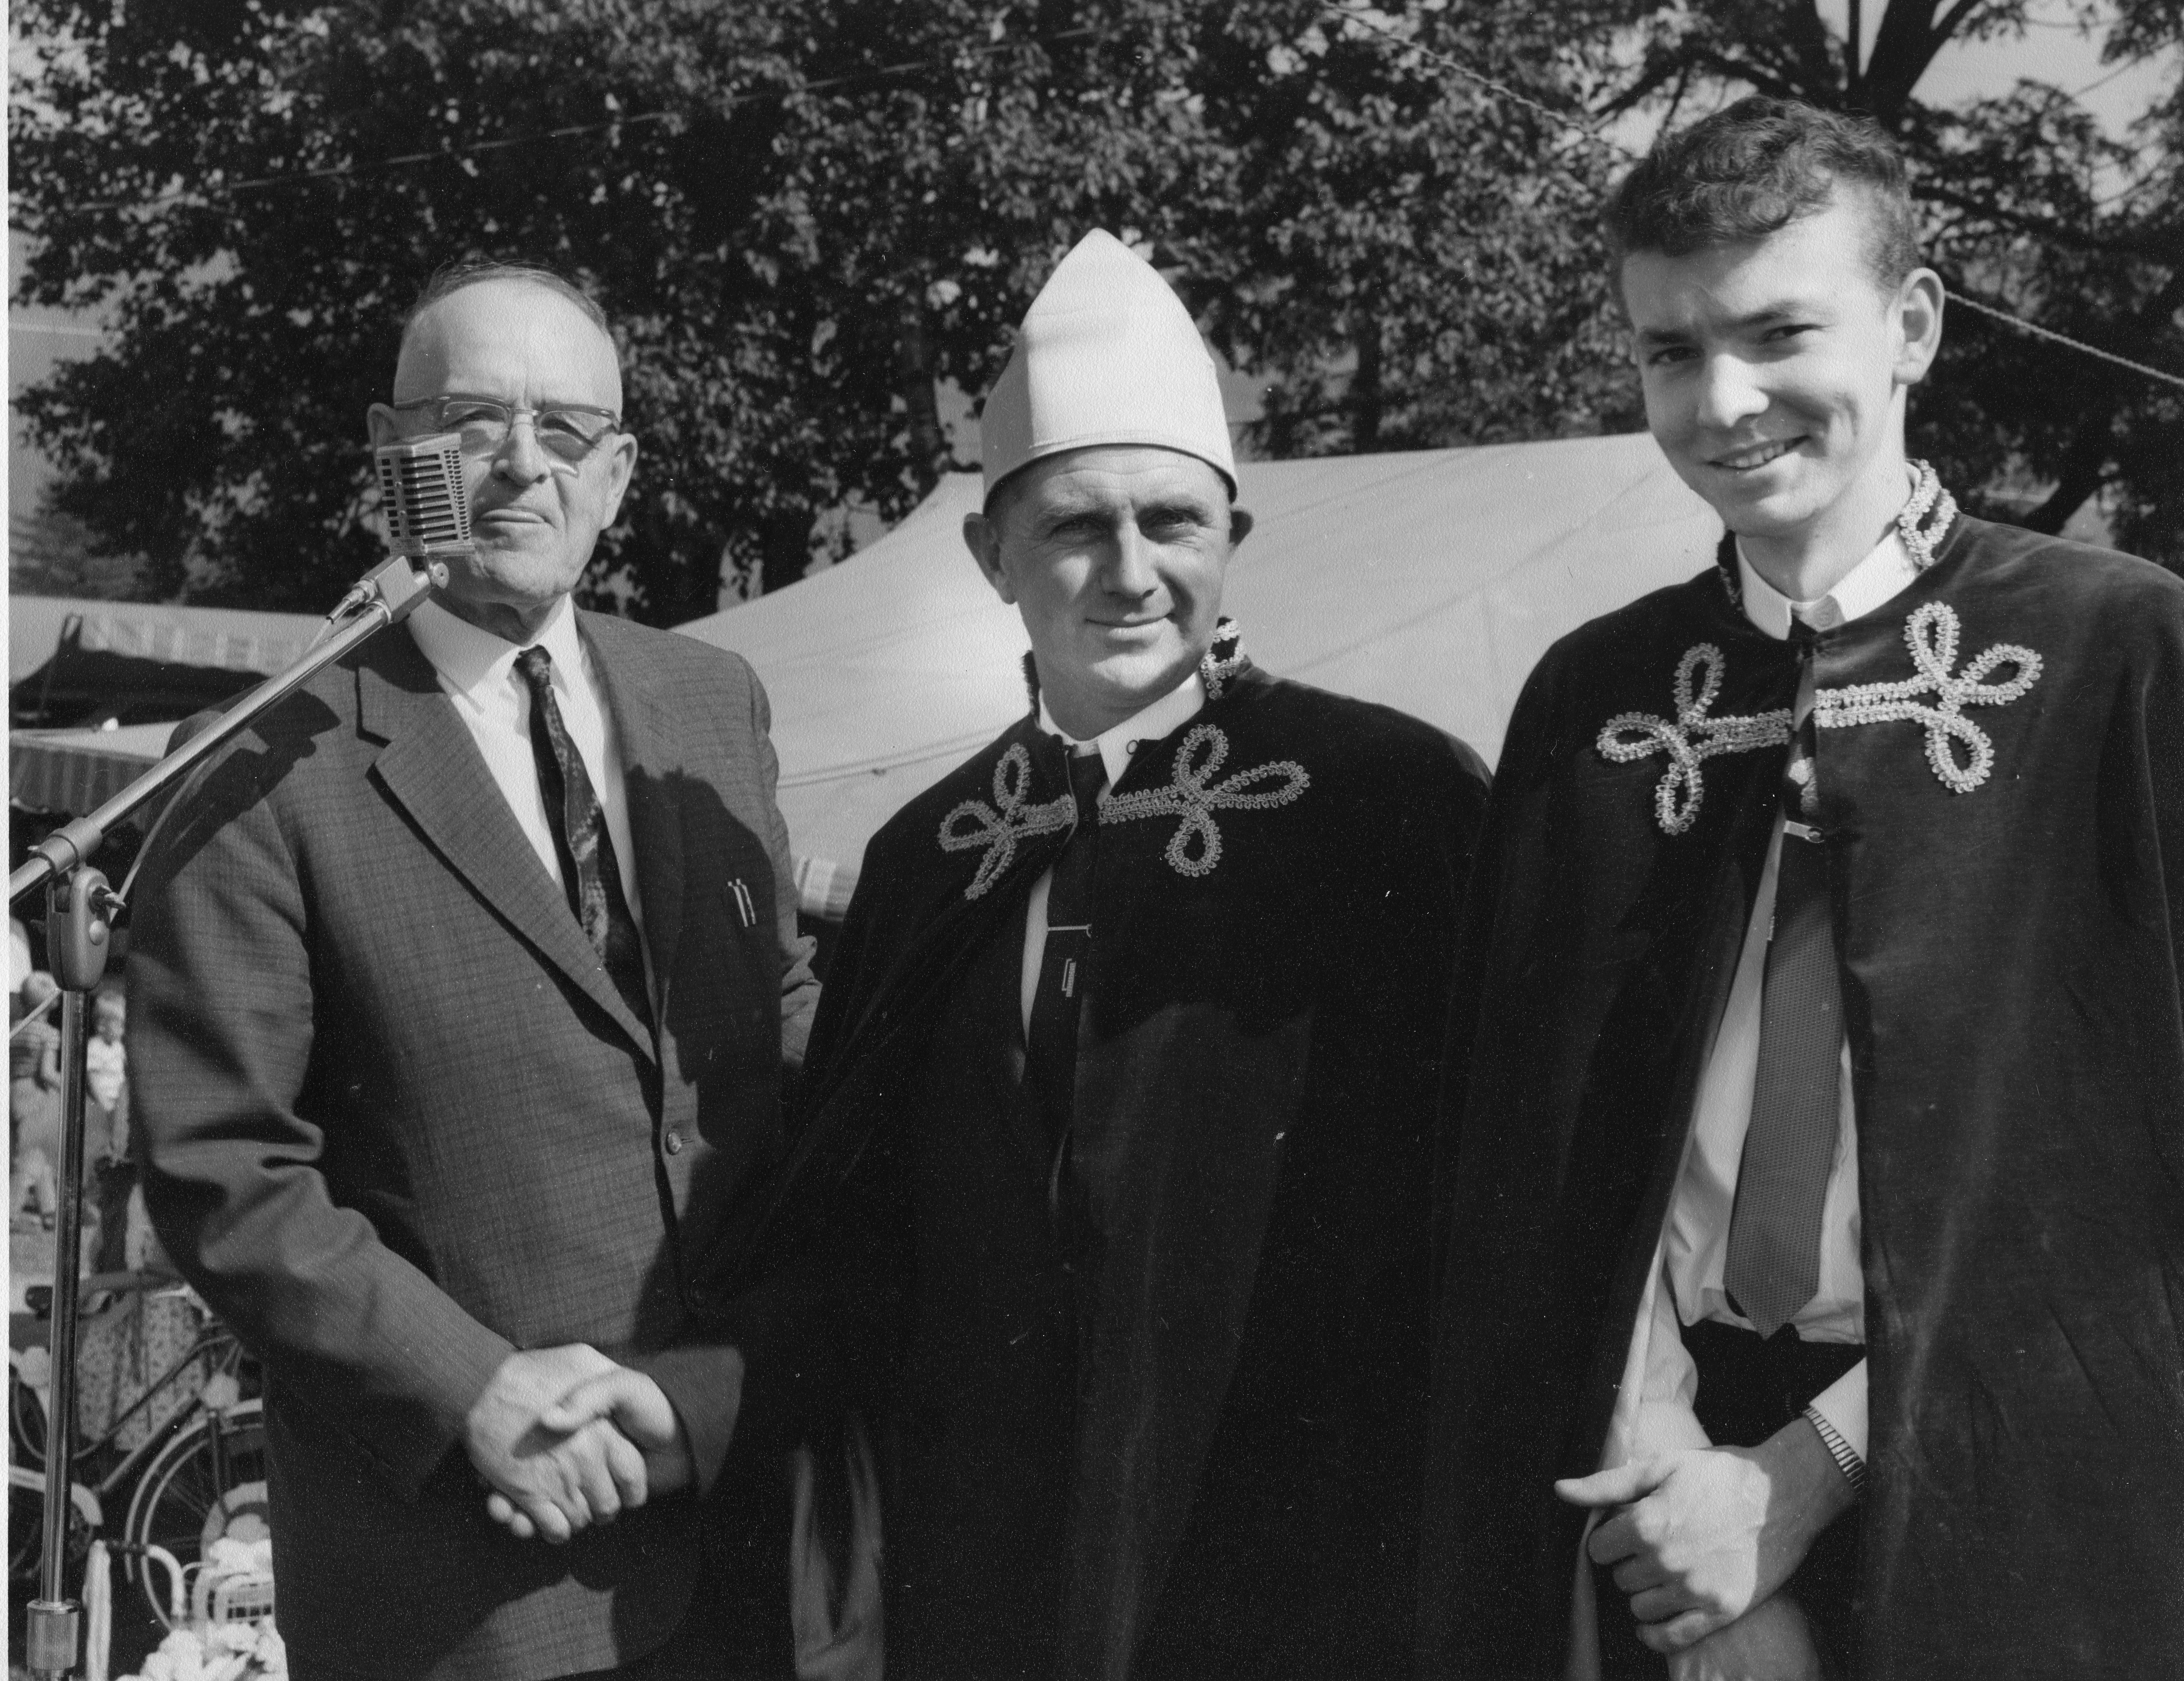 Black and white photograph of three men: one man is wearing a suit and the other two are wearing robes. The two men on the right are the corn kings from 1963 and 1964. The man on the left in front of the microphone is the master of ceremonies.